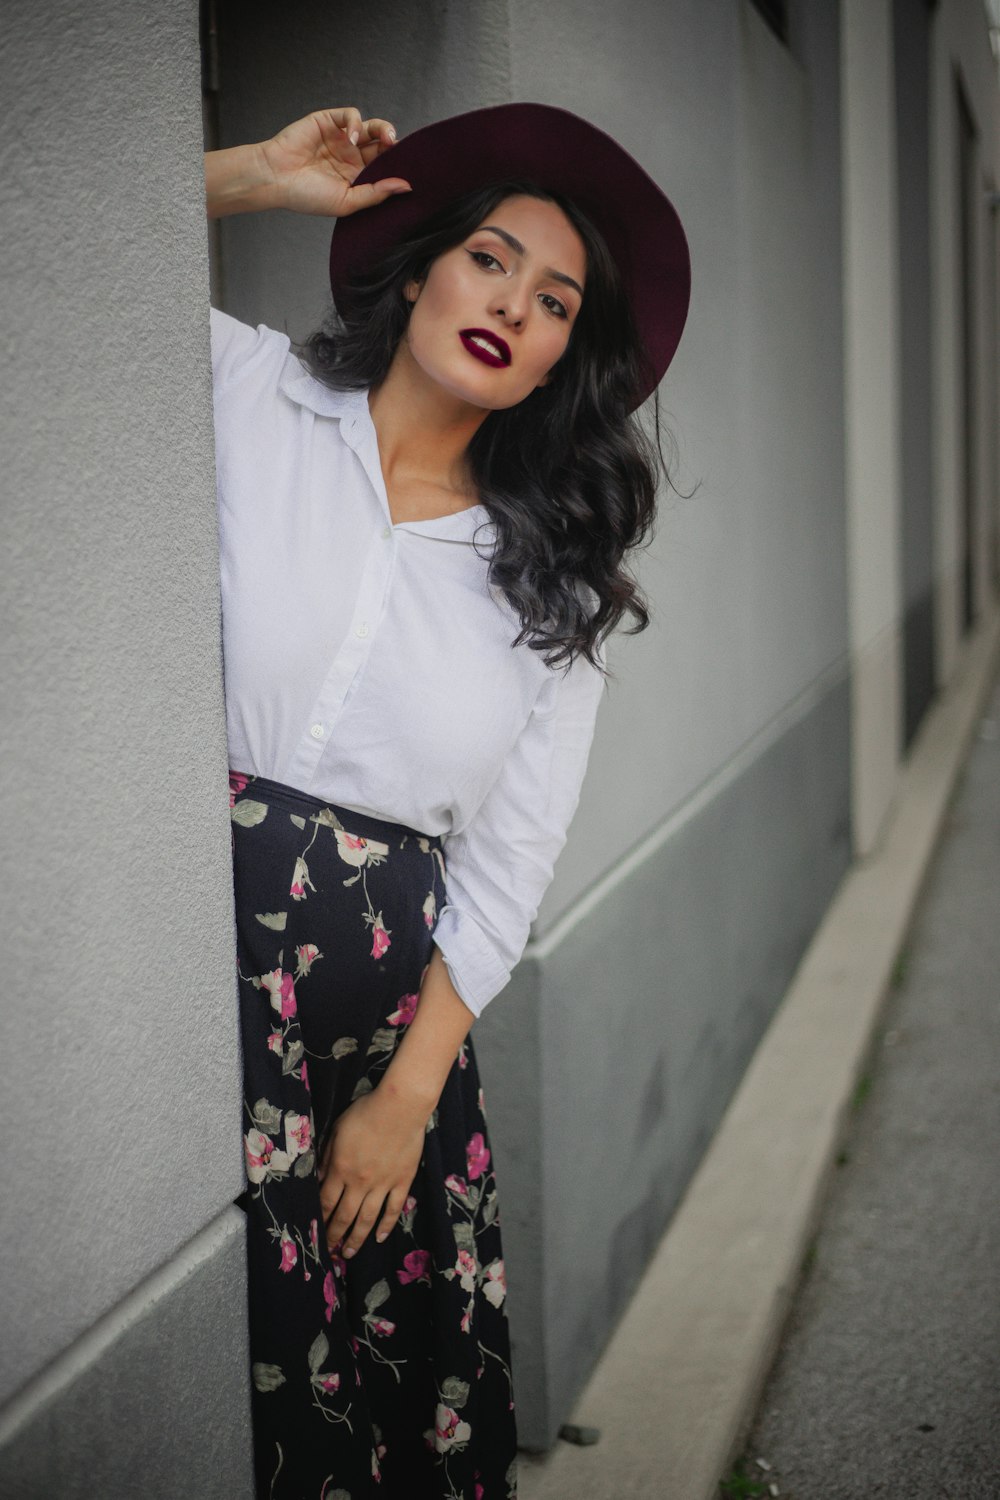 woman in white long sleeve shirt and black floral skirt